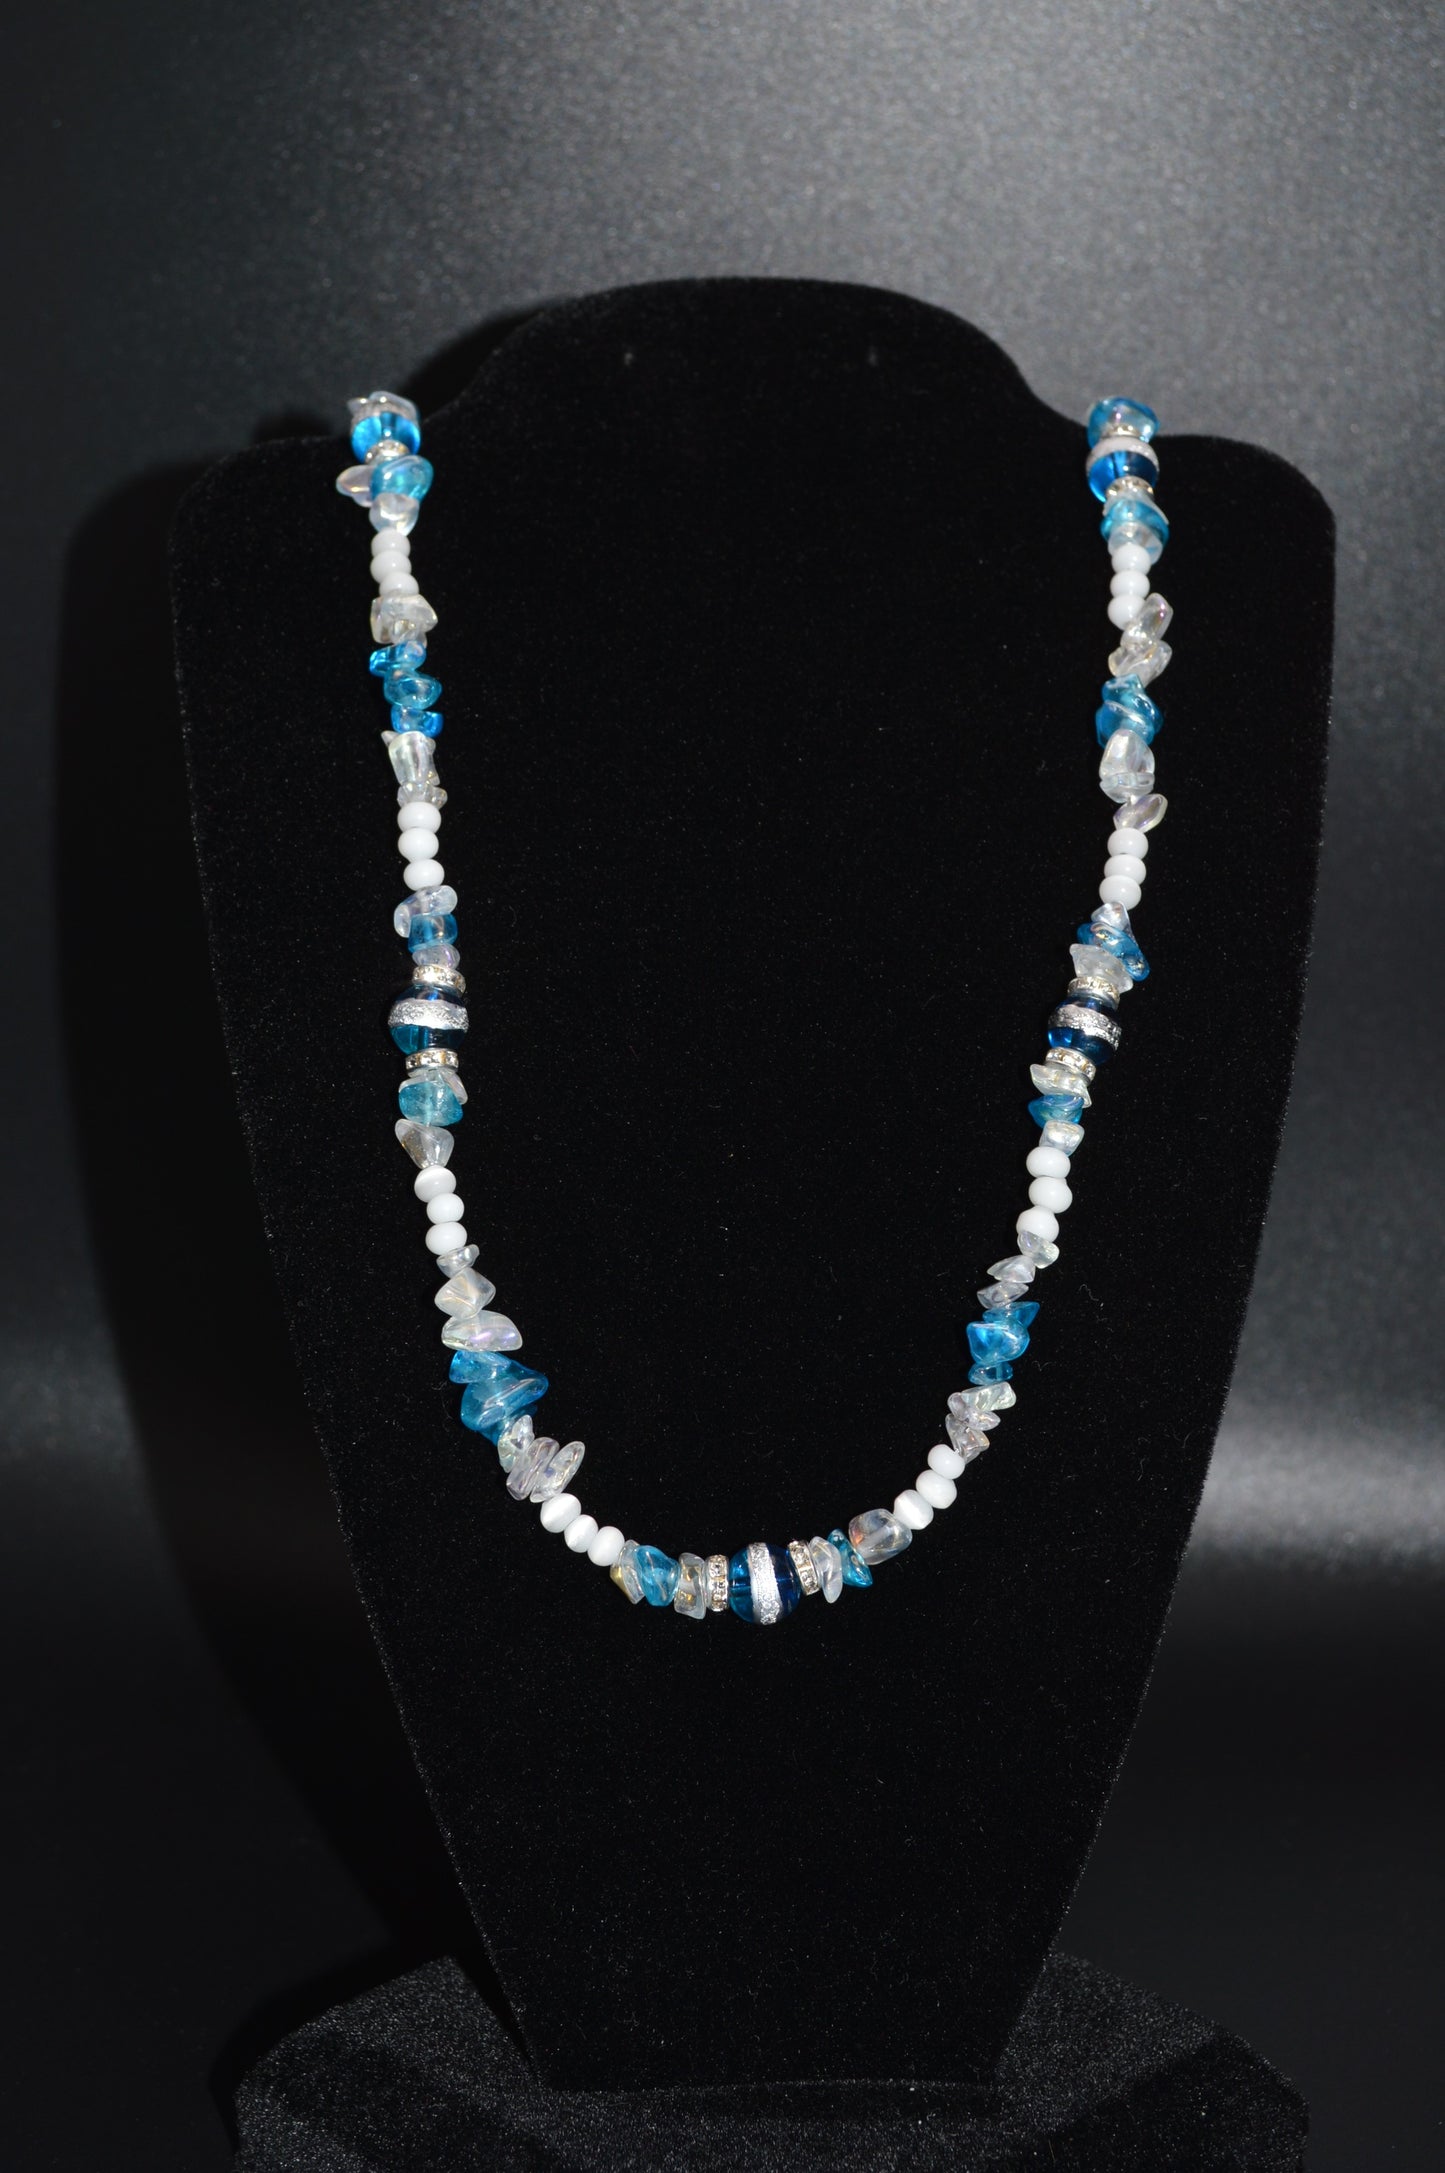 Blue Silver Striped Glass Beads with Glass Chips and Crystal Spacers Necklace